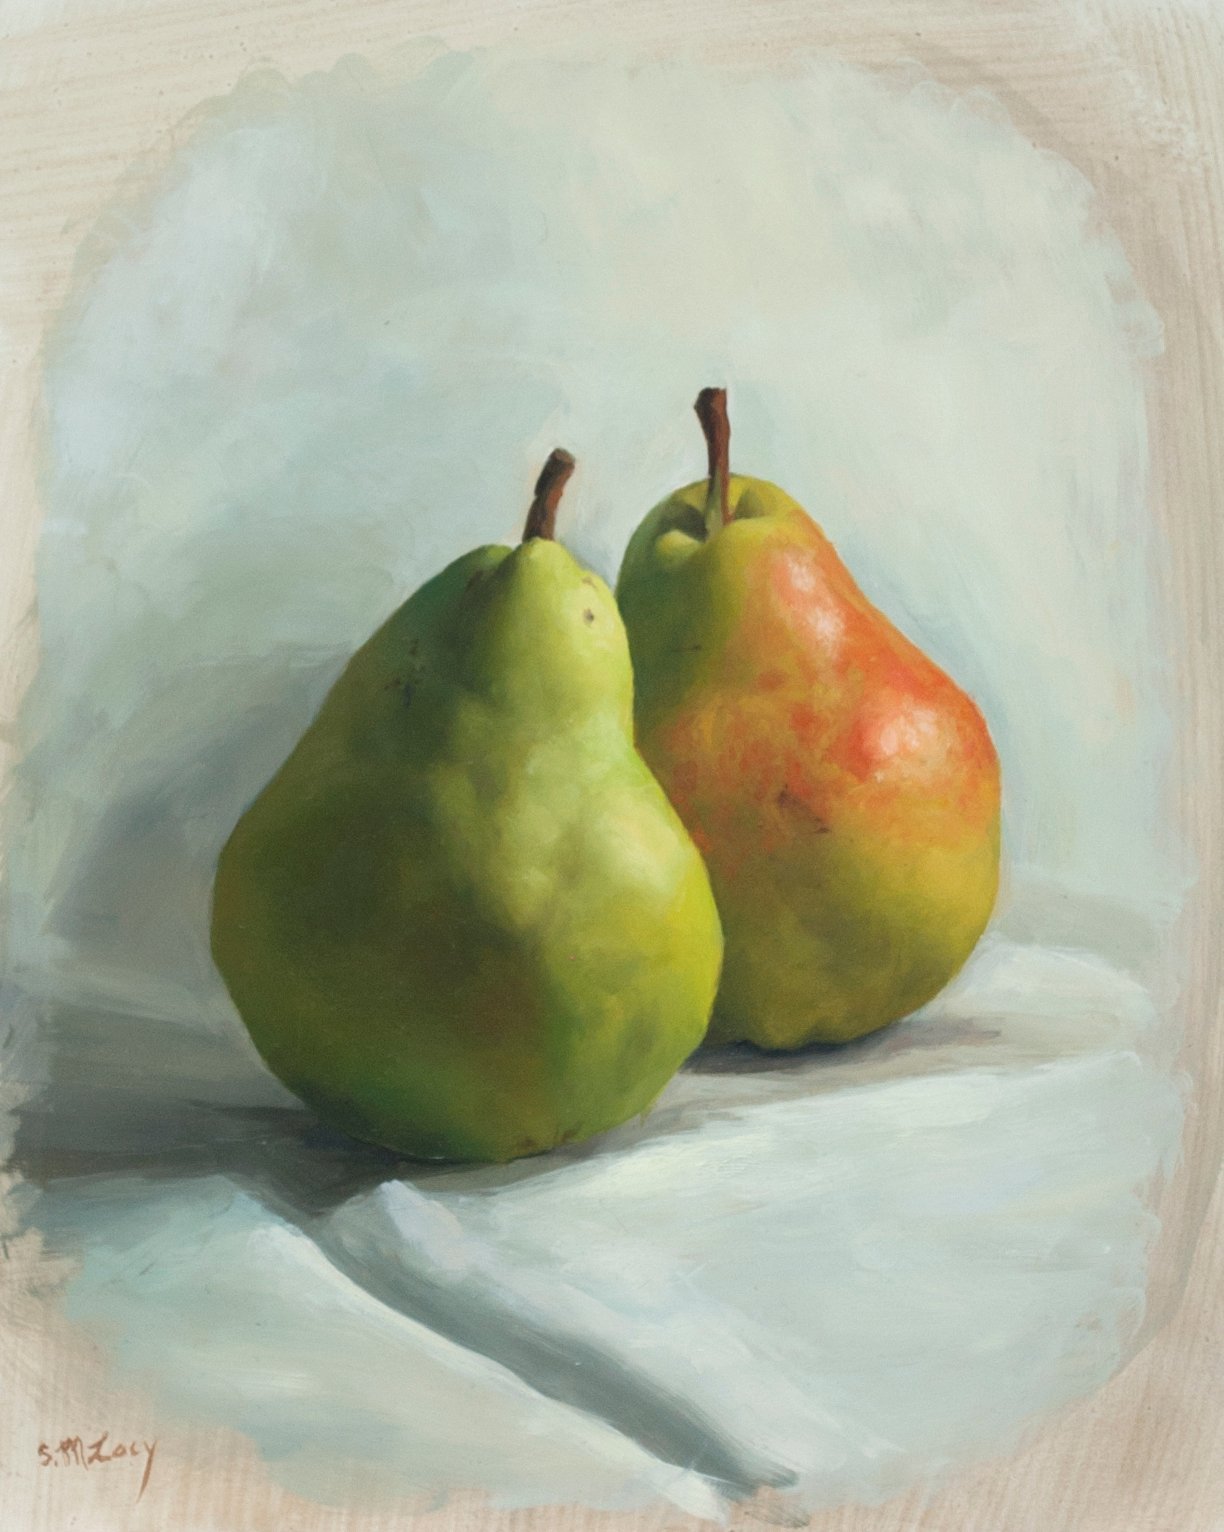 Image of 8" x 10" Print of a "A Pair of Pears"